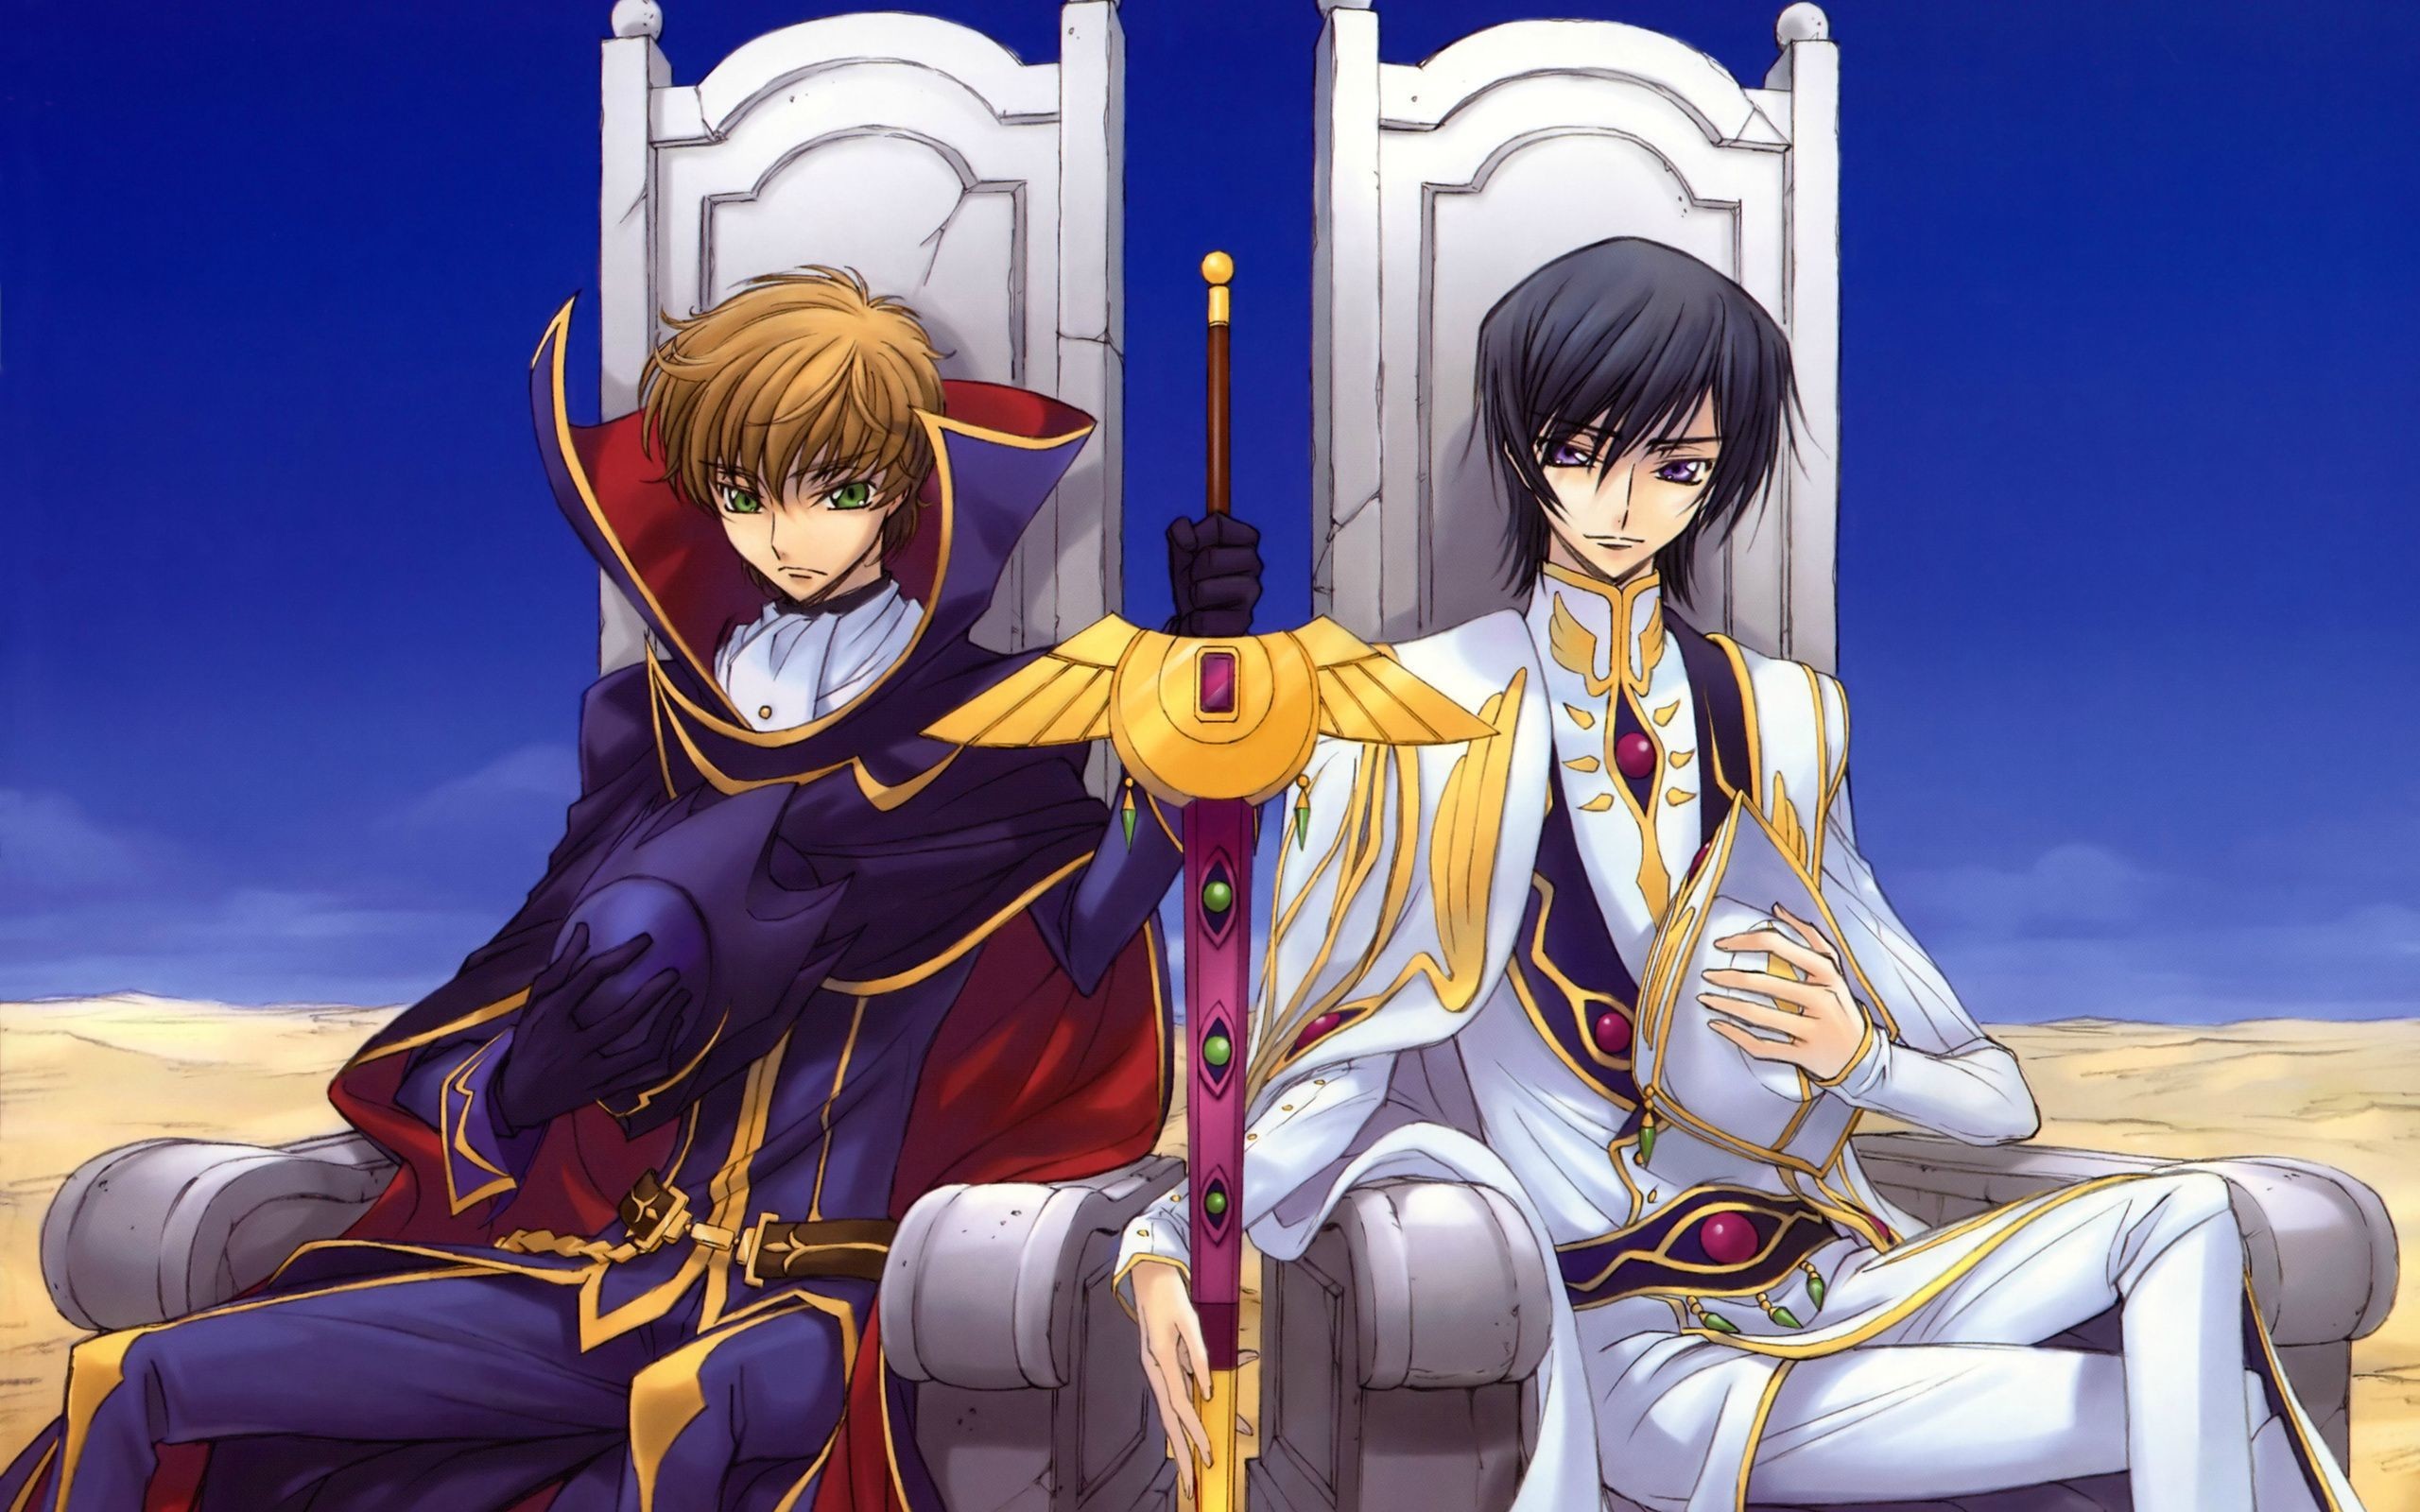 2560x1600 Code Geass Wallpapers for PC.